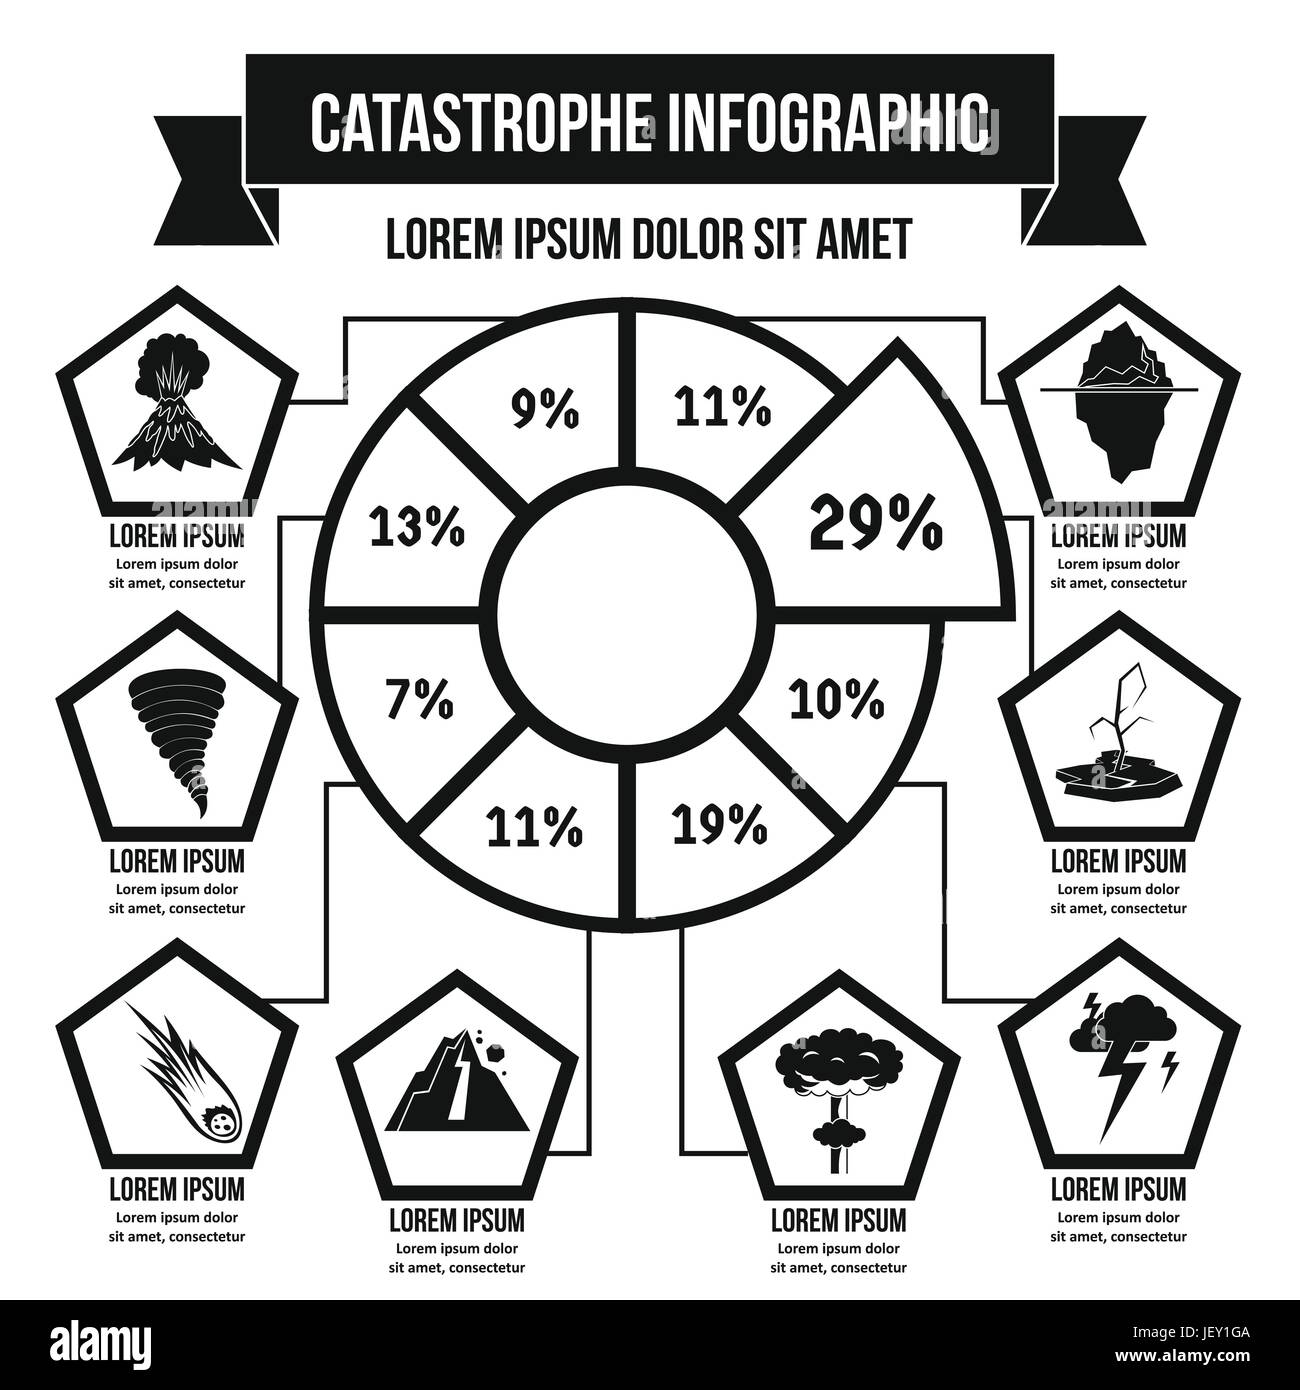 Catastrophe infographic concept, simple style Stock Vector